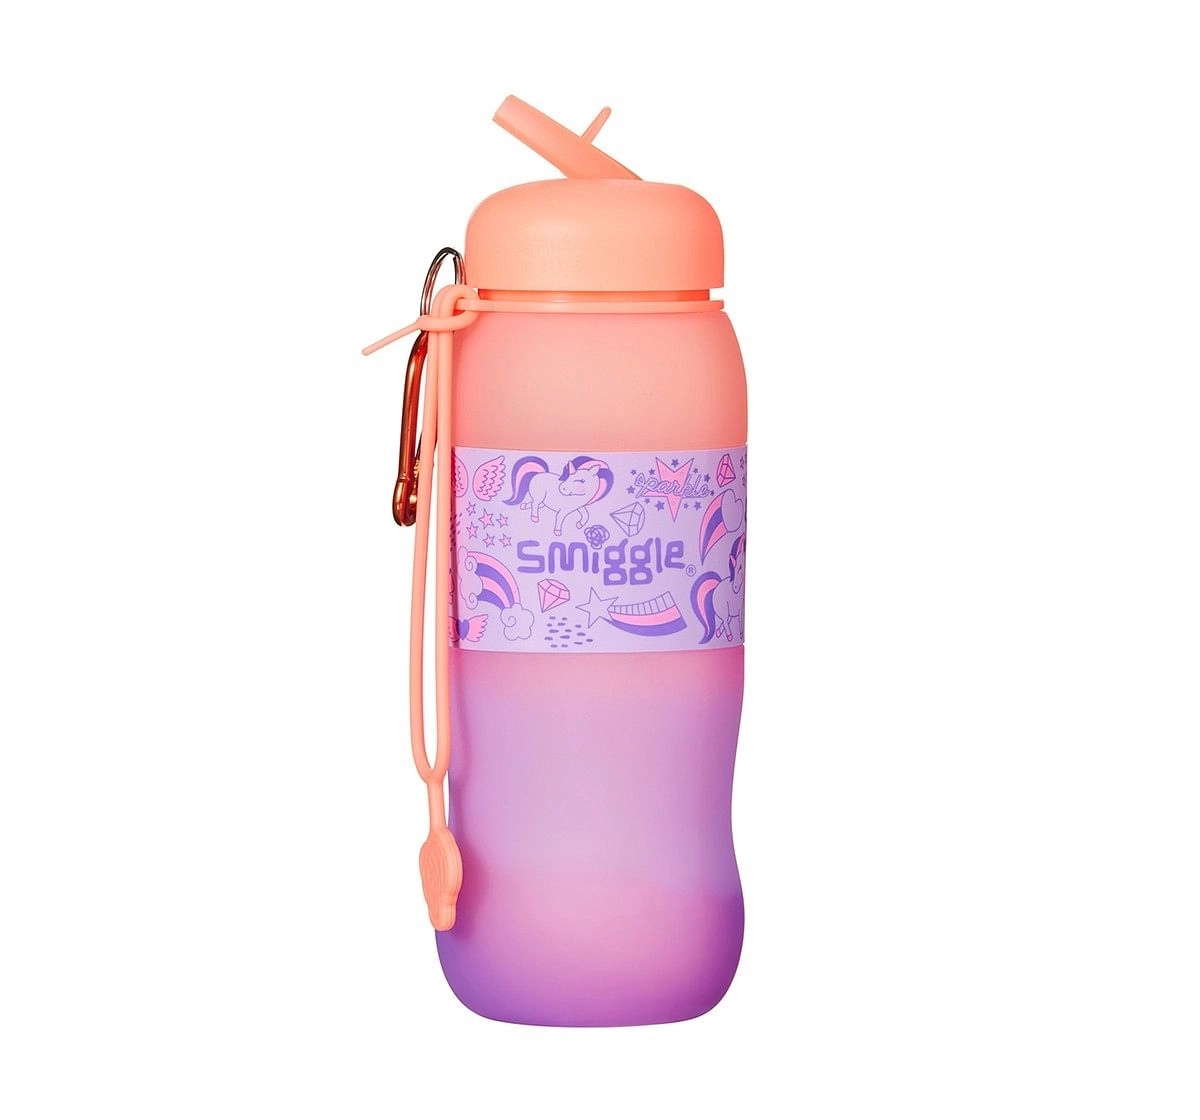 Smiggle Golly Silicone Roll Drink Bottle - Unicorn Print Bags for Kids age 3Y+ (Coral)